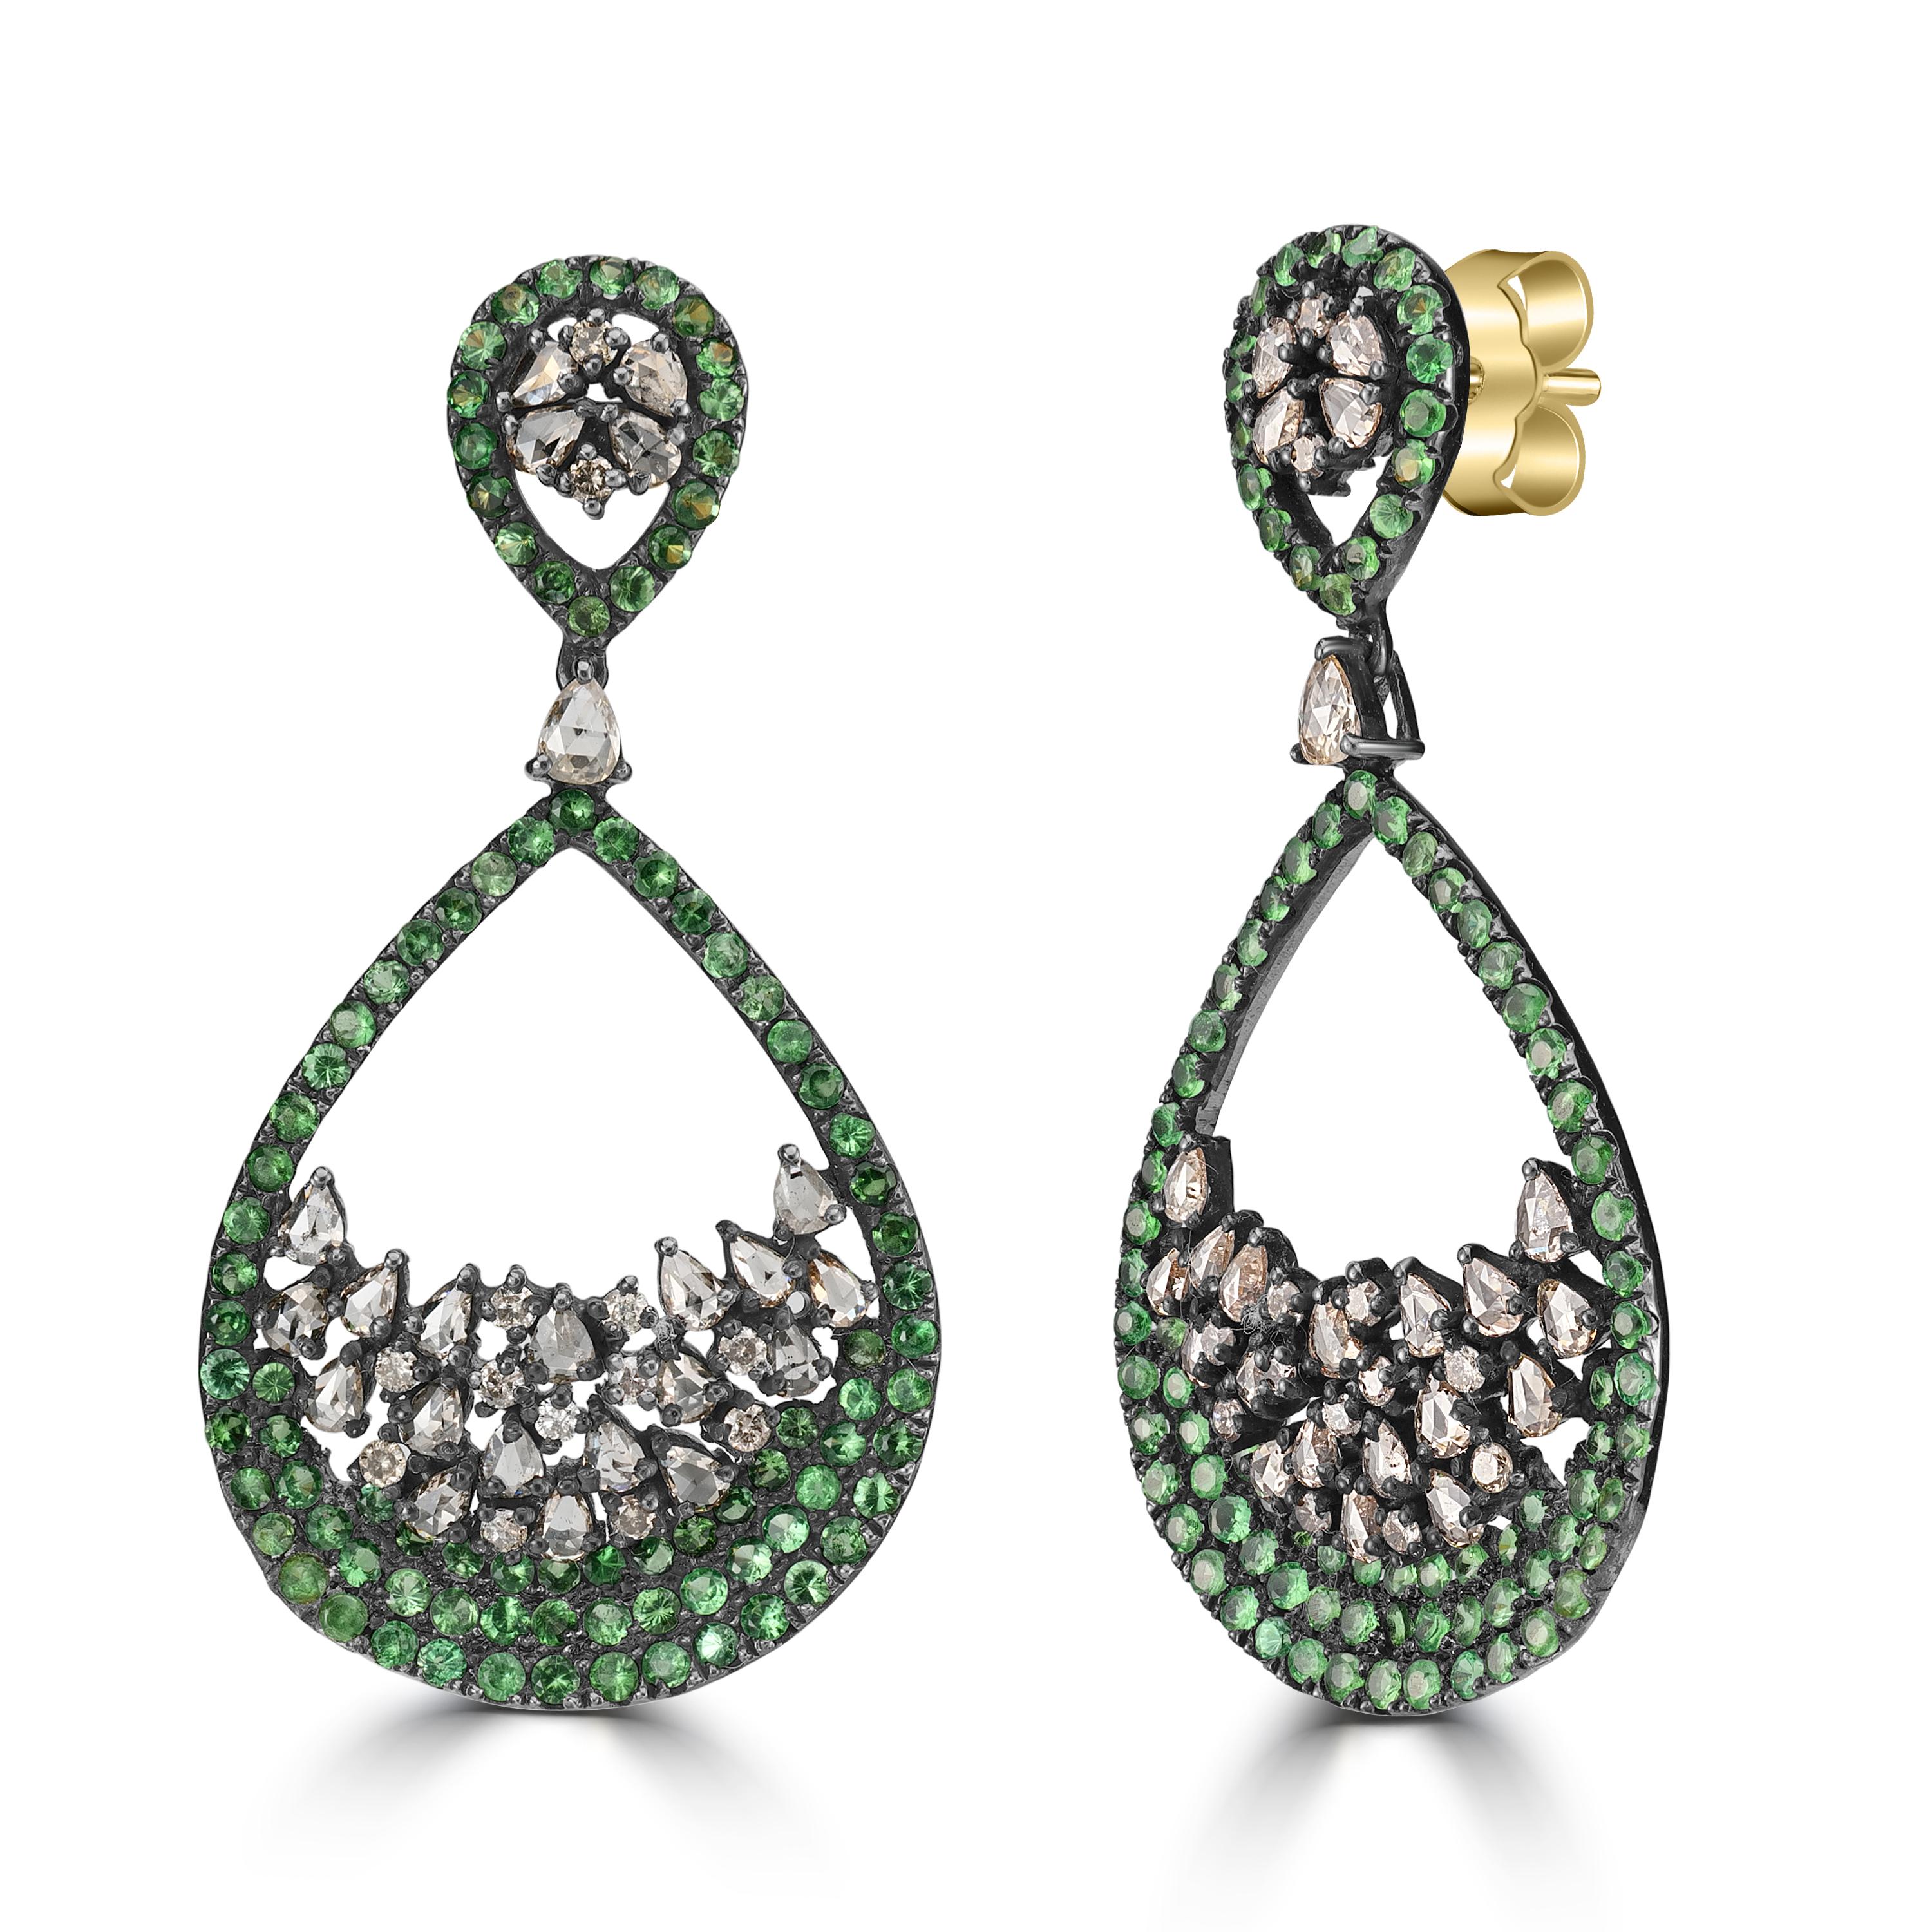 Introducing the Victorian 6 Cttw. Tsavorite and Diamond Tear Drop Earrings, an exquisite pair of earrings that seamlessly blends vintage charm with modern sophistication. These earrings are crafted to perfection, featuring a striking combination of